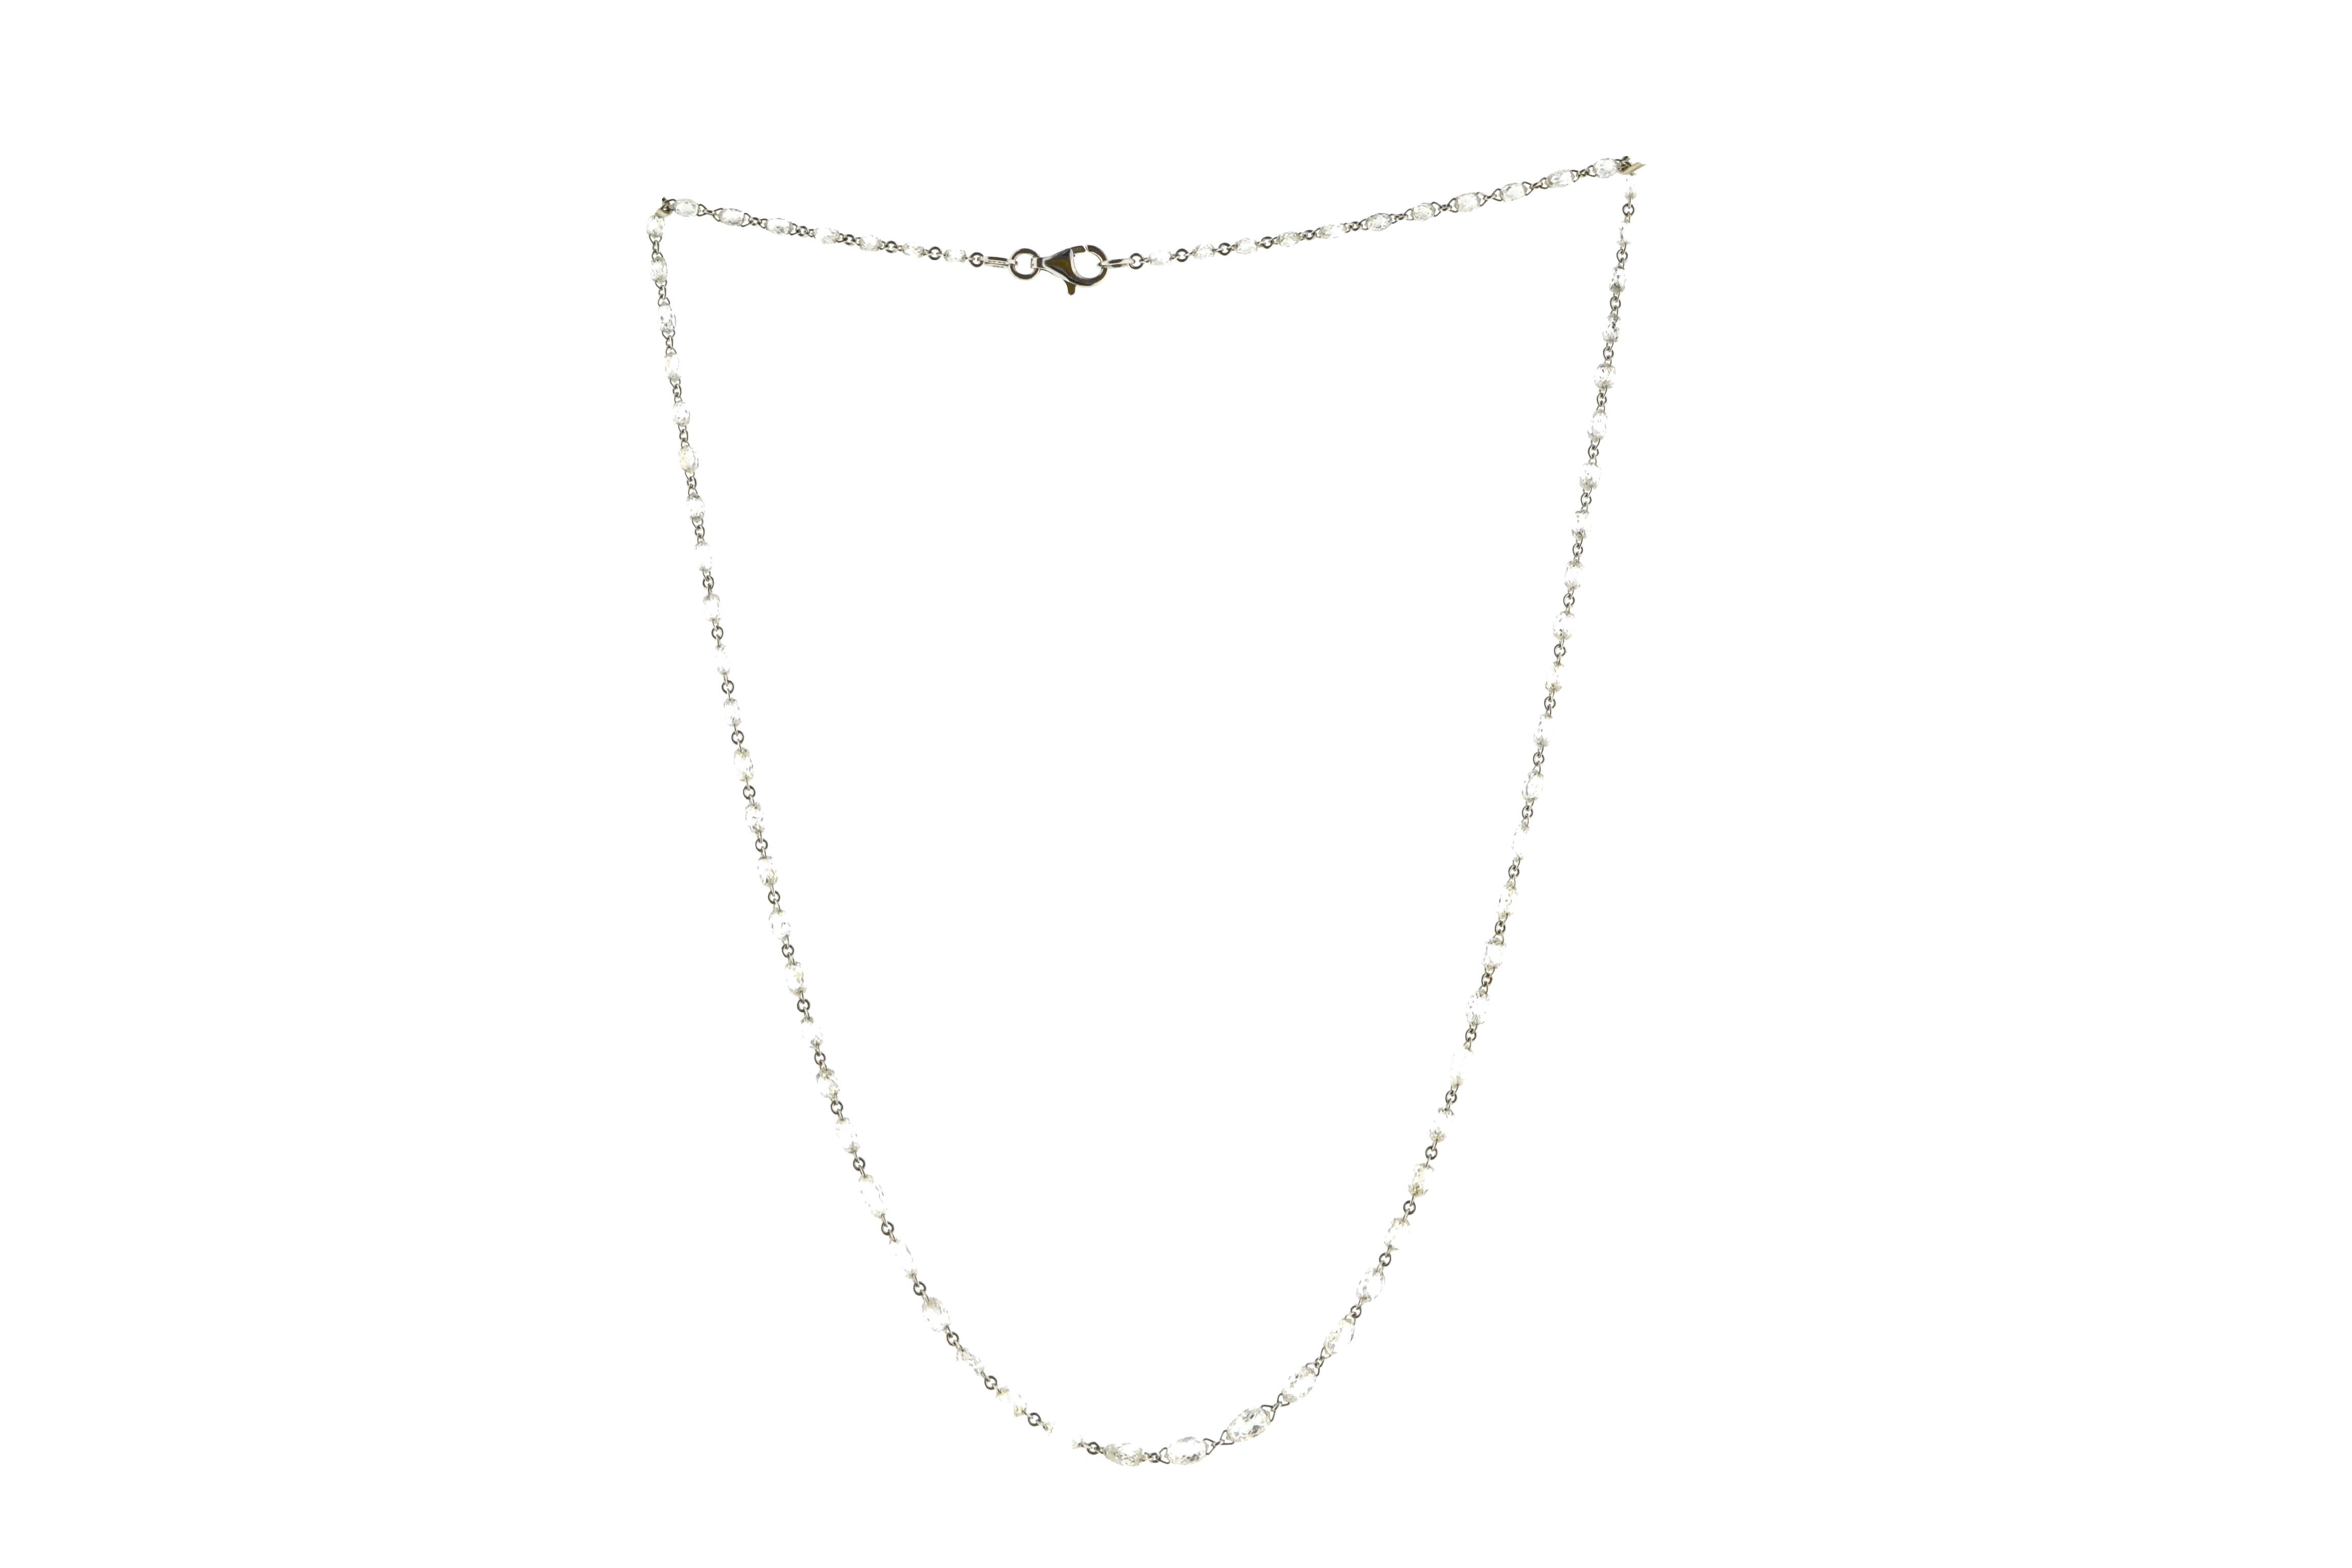 JR 15.14 Carat Briolette Cut Diamond 18 Karat White Gold Necklace

This statement necklace provides with a complete look in itself. Its made by White Briolette cut diamond linked with 18 karat White gold. 

Necklace length : 18